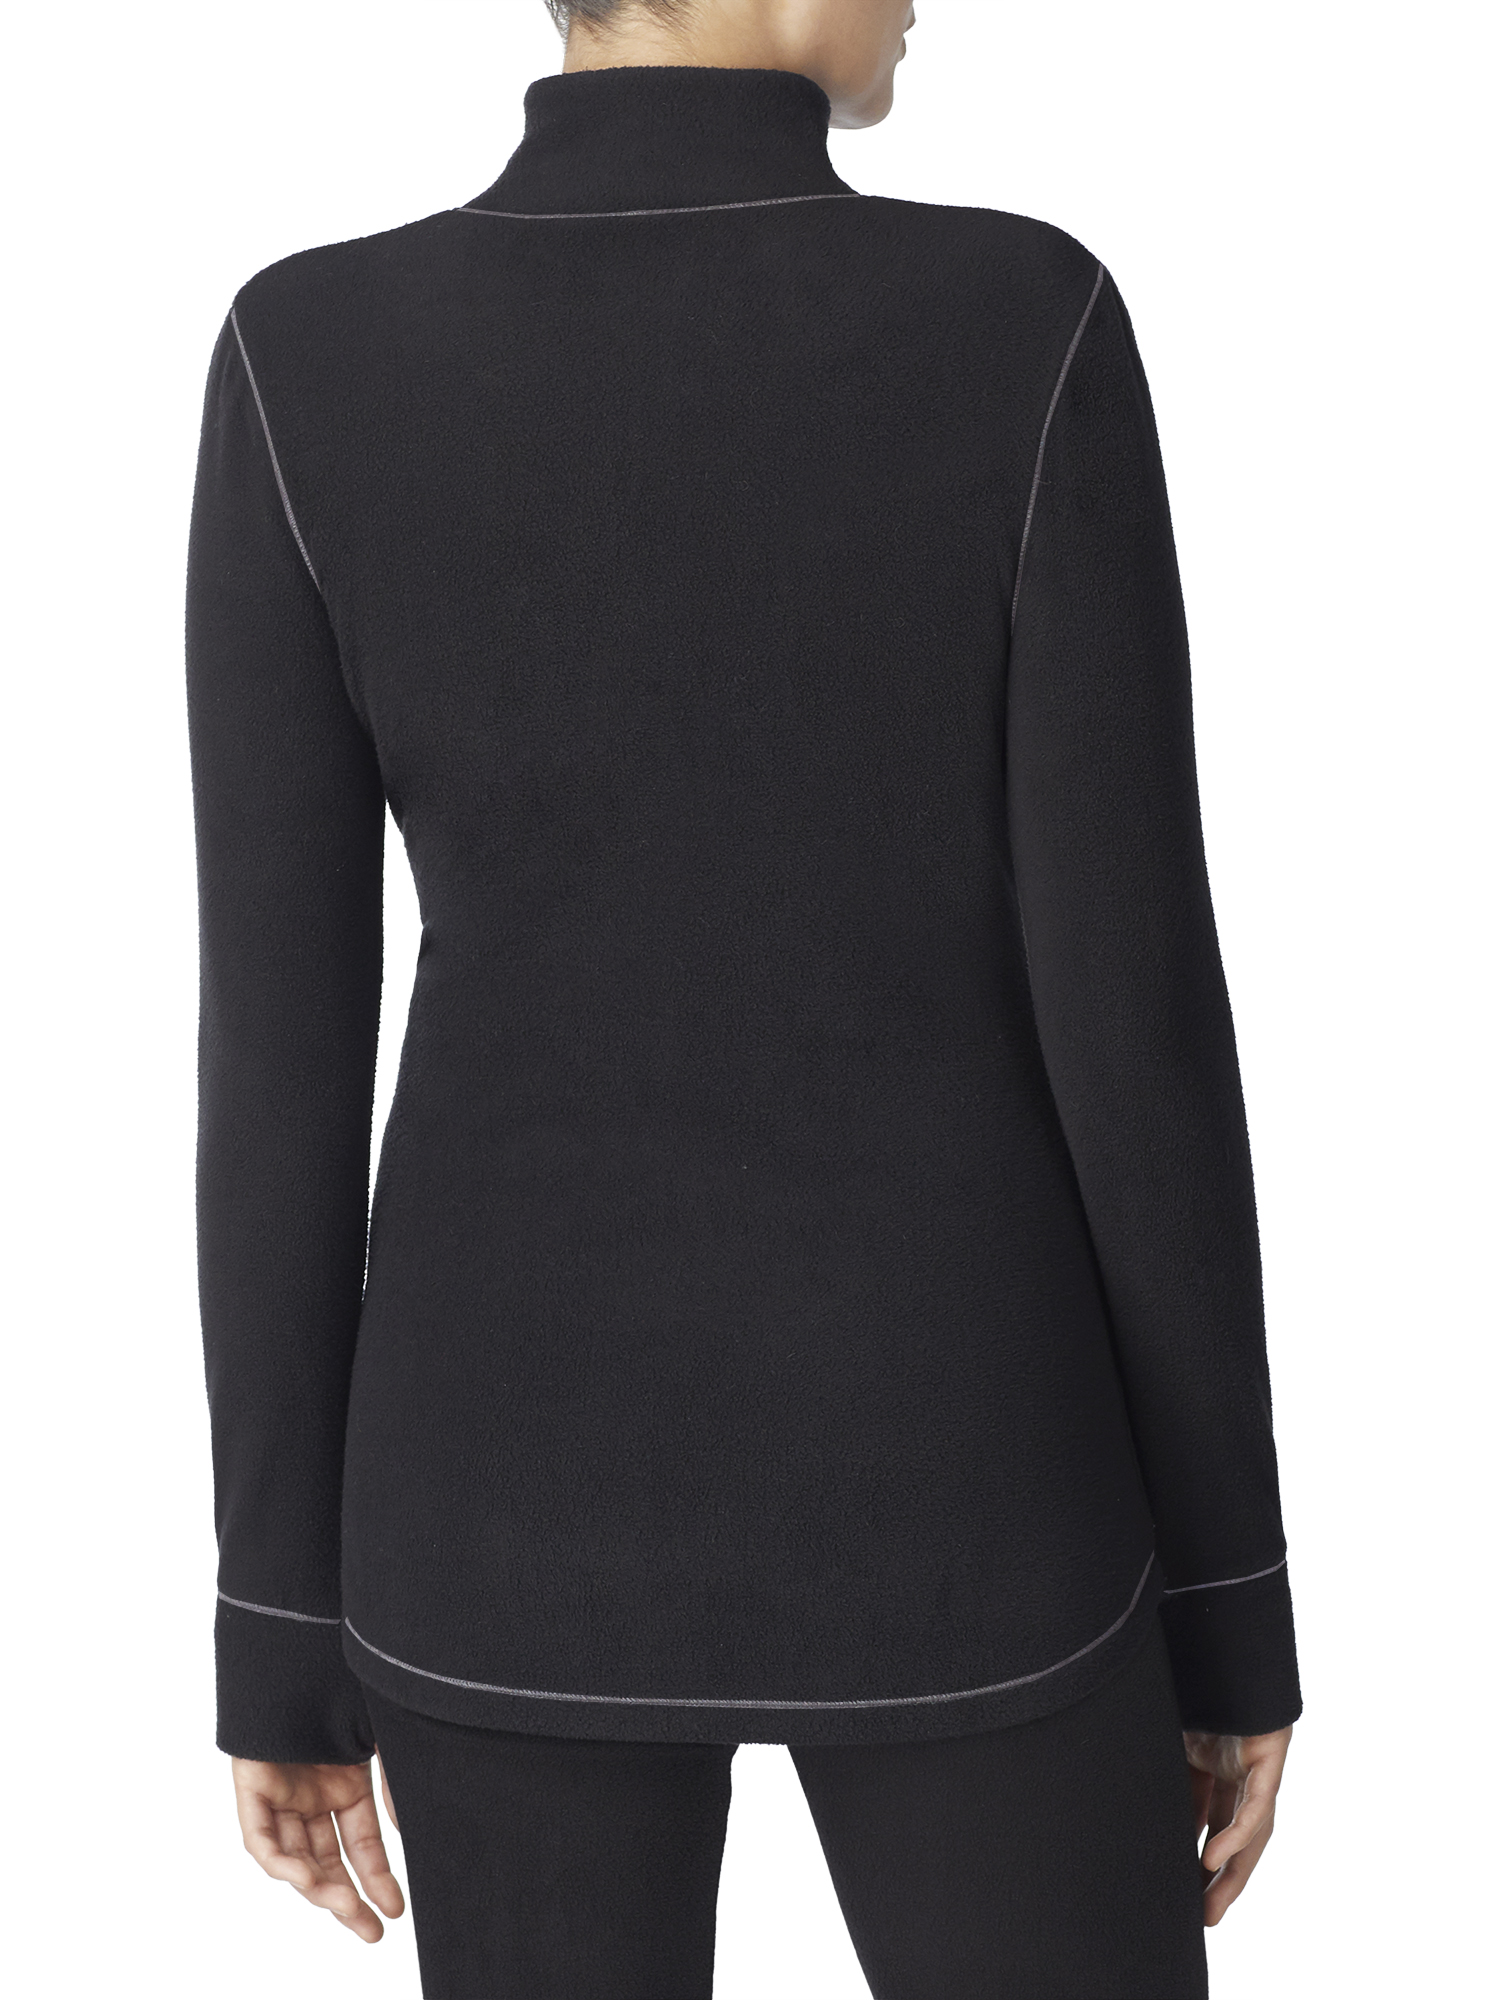 ClimateRight by Cuddl Duds Women's Stretch Fleece Base Layer Half Zip Thermal Top - image 3 of 4